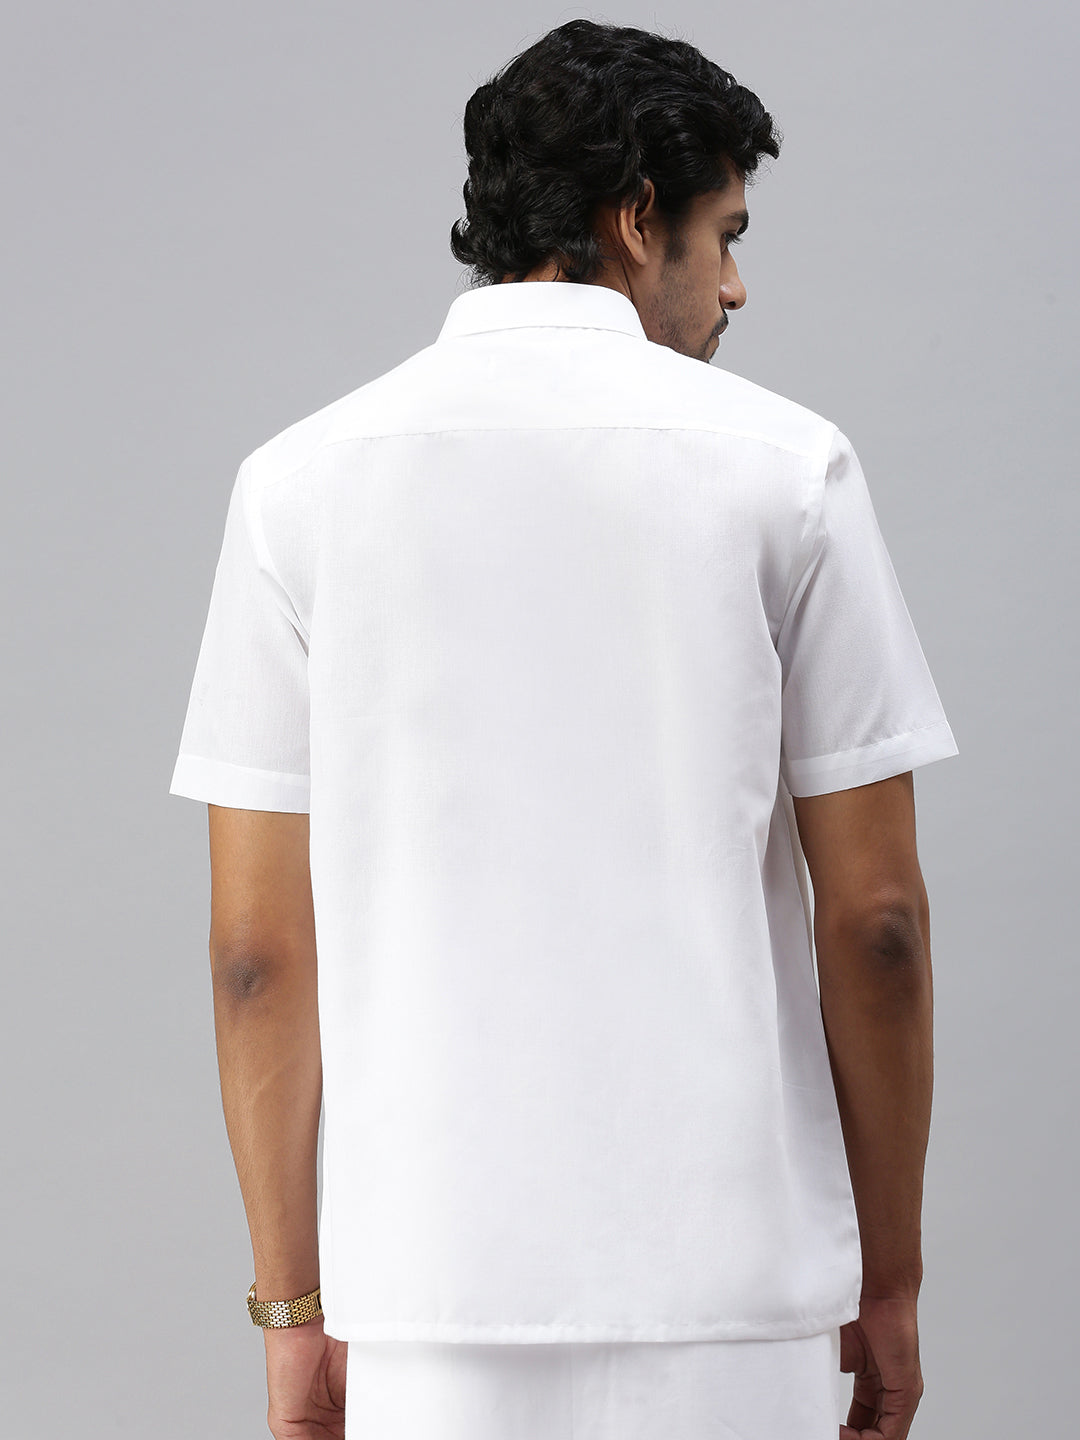 Mens Poly Cotton Half Sleeves Prestigious Fit White Shirt Minister-Back view